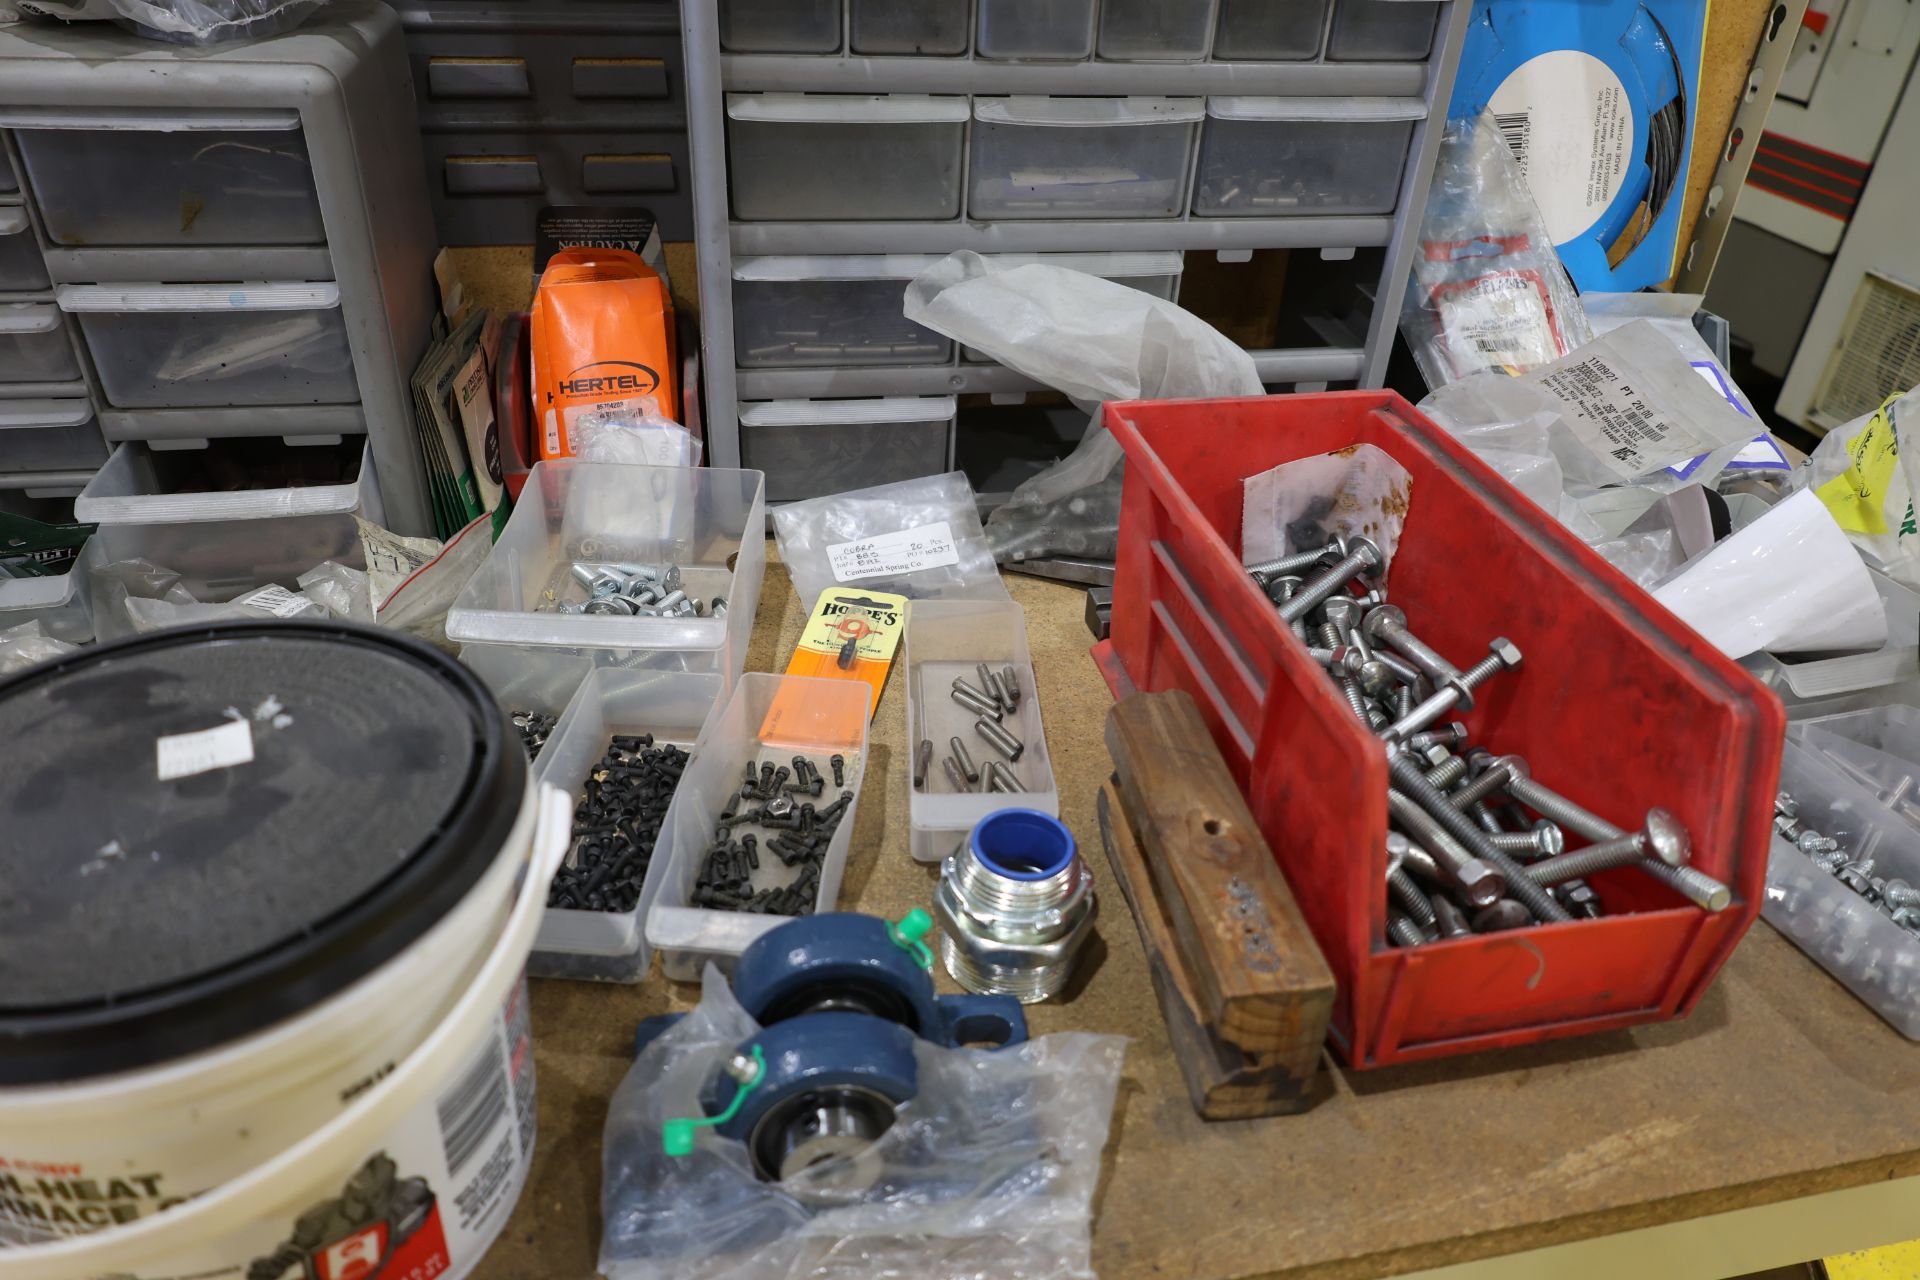 Work Bench with Contents Pictured - Image 4 of 6